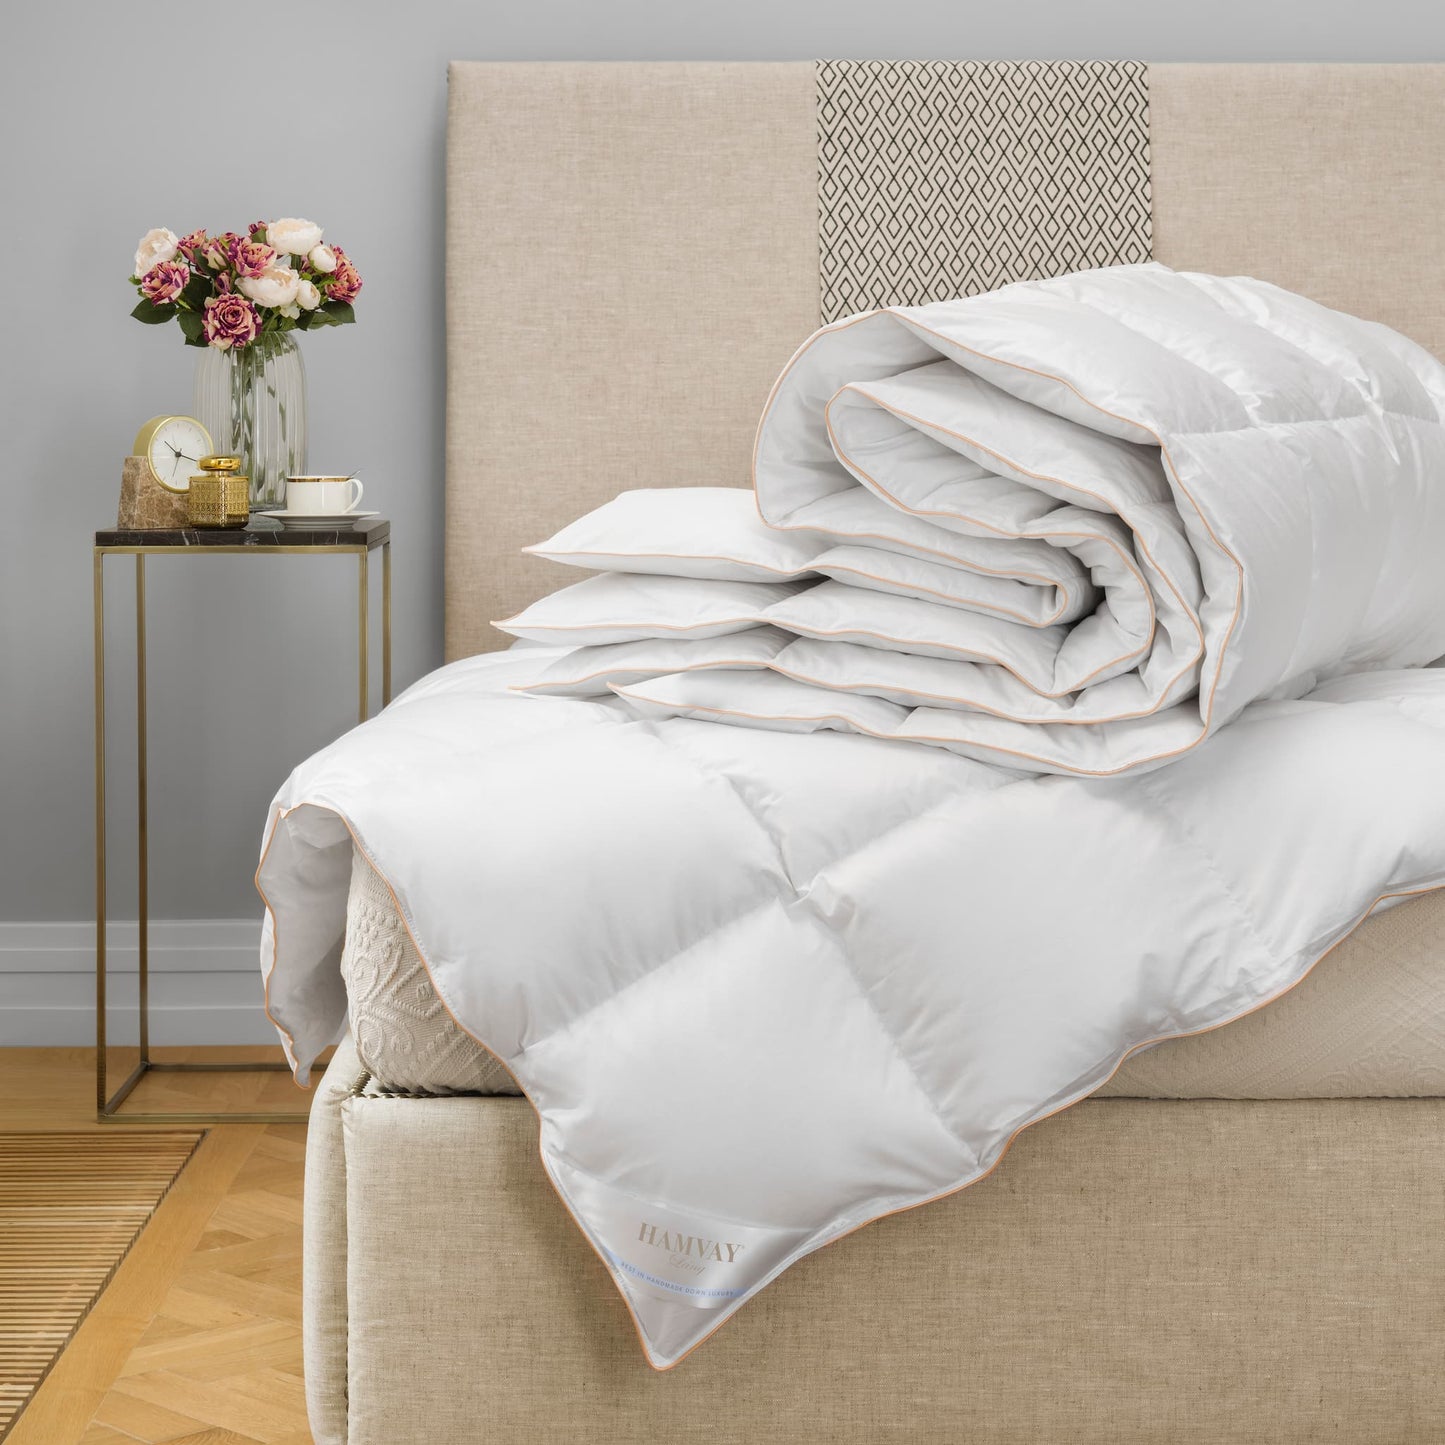 PureDelight Hungarian goose down comforter rolled on a bed